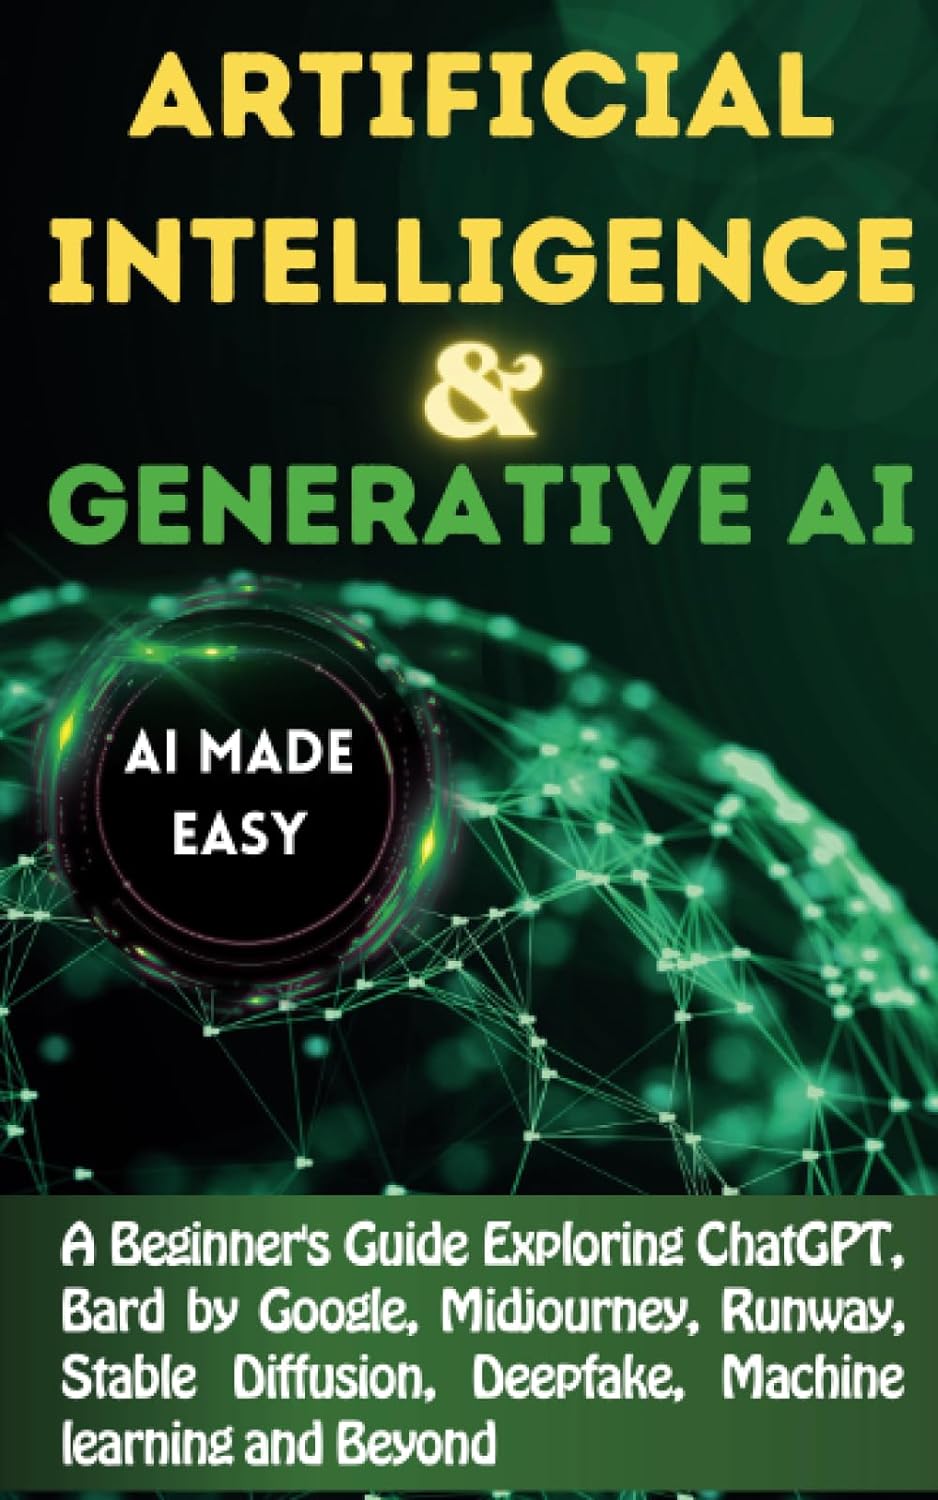 Artificial Intelligence and Generative AI Made EASY: A Beginners Guide Exploring ChatGPT, Bard by Google, Midjourney, Deepfake , Stable Diffusion, and Beyond